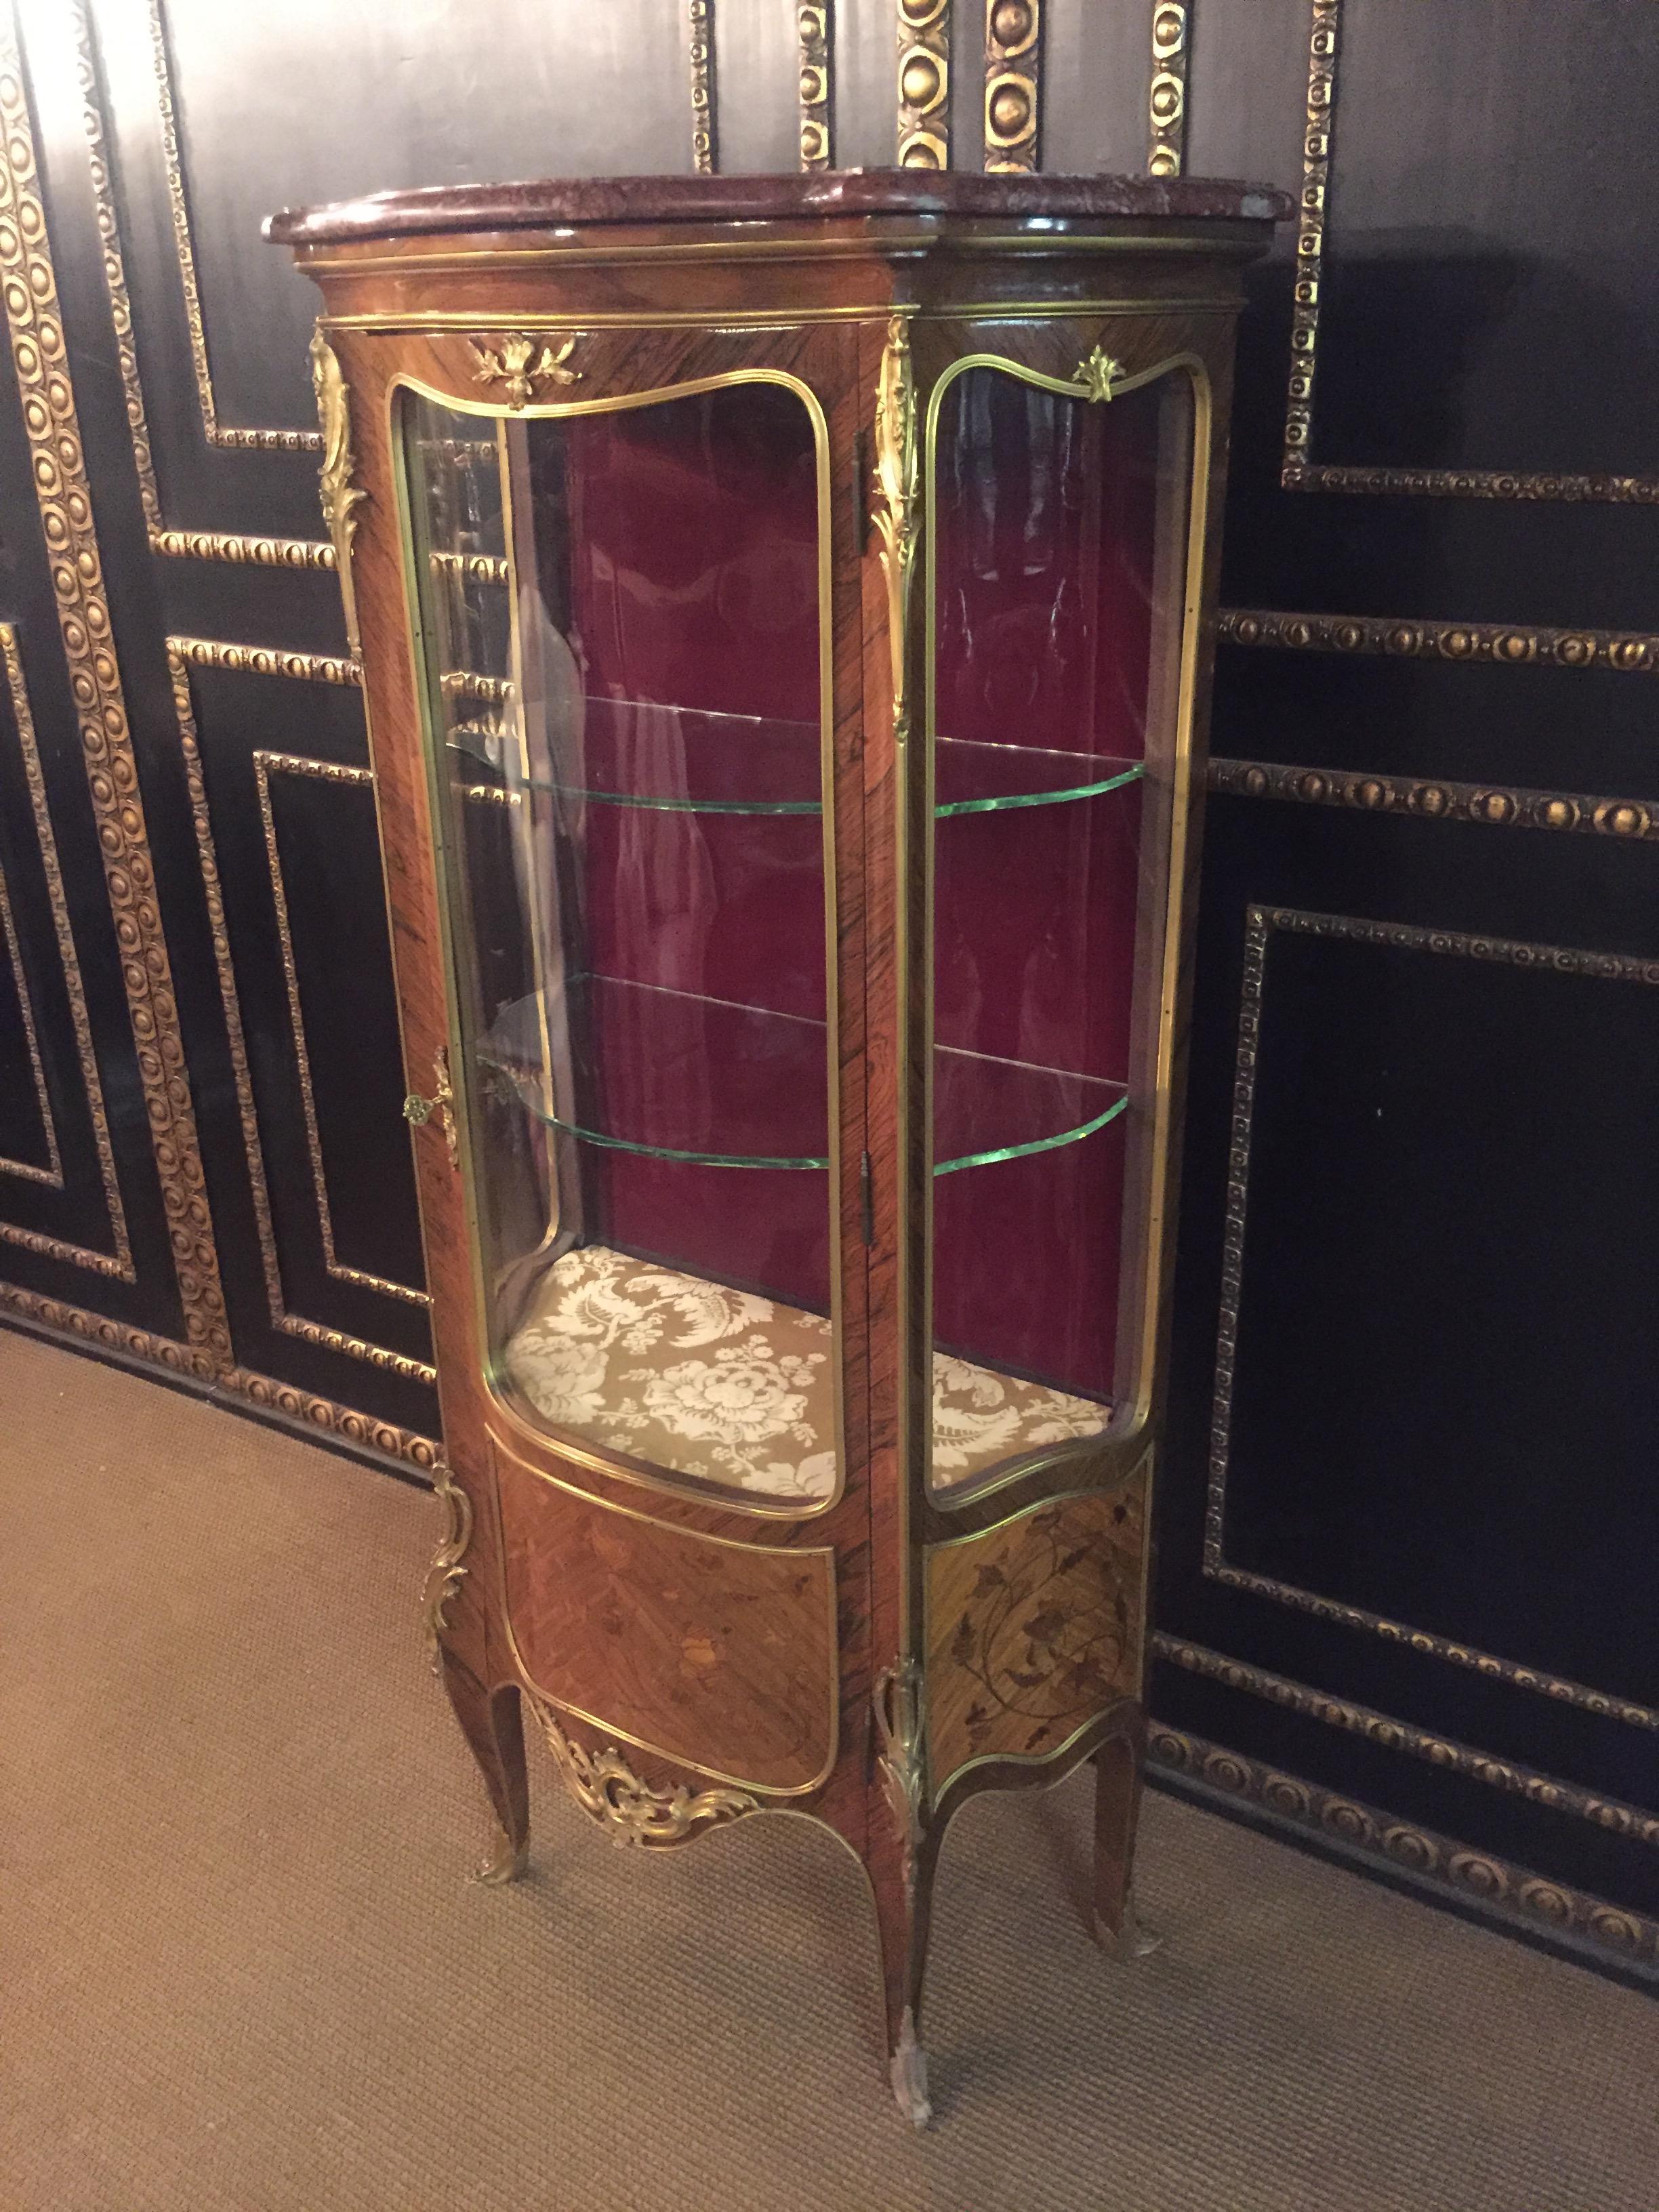 Vitrine in the style of Louis XV Napoleon III Paris, circa 1850-1880 Bois-Satiné veneer, all-round surface-covering mirror veneer on solid softwood. High-rectangular, one-door, cambered and three-sided glazed body on high slanted, angled feet.